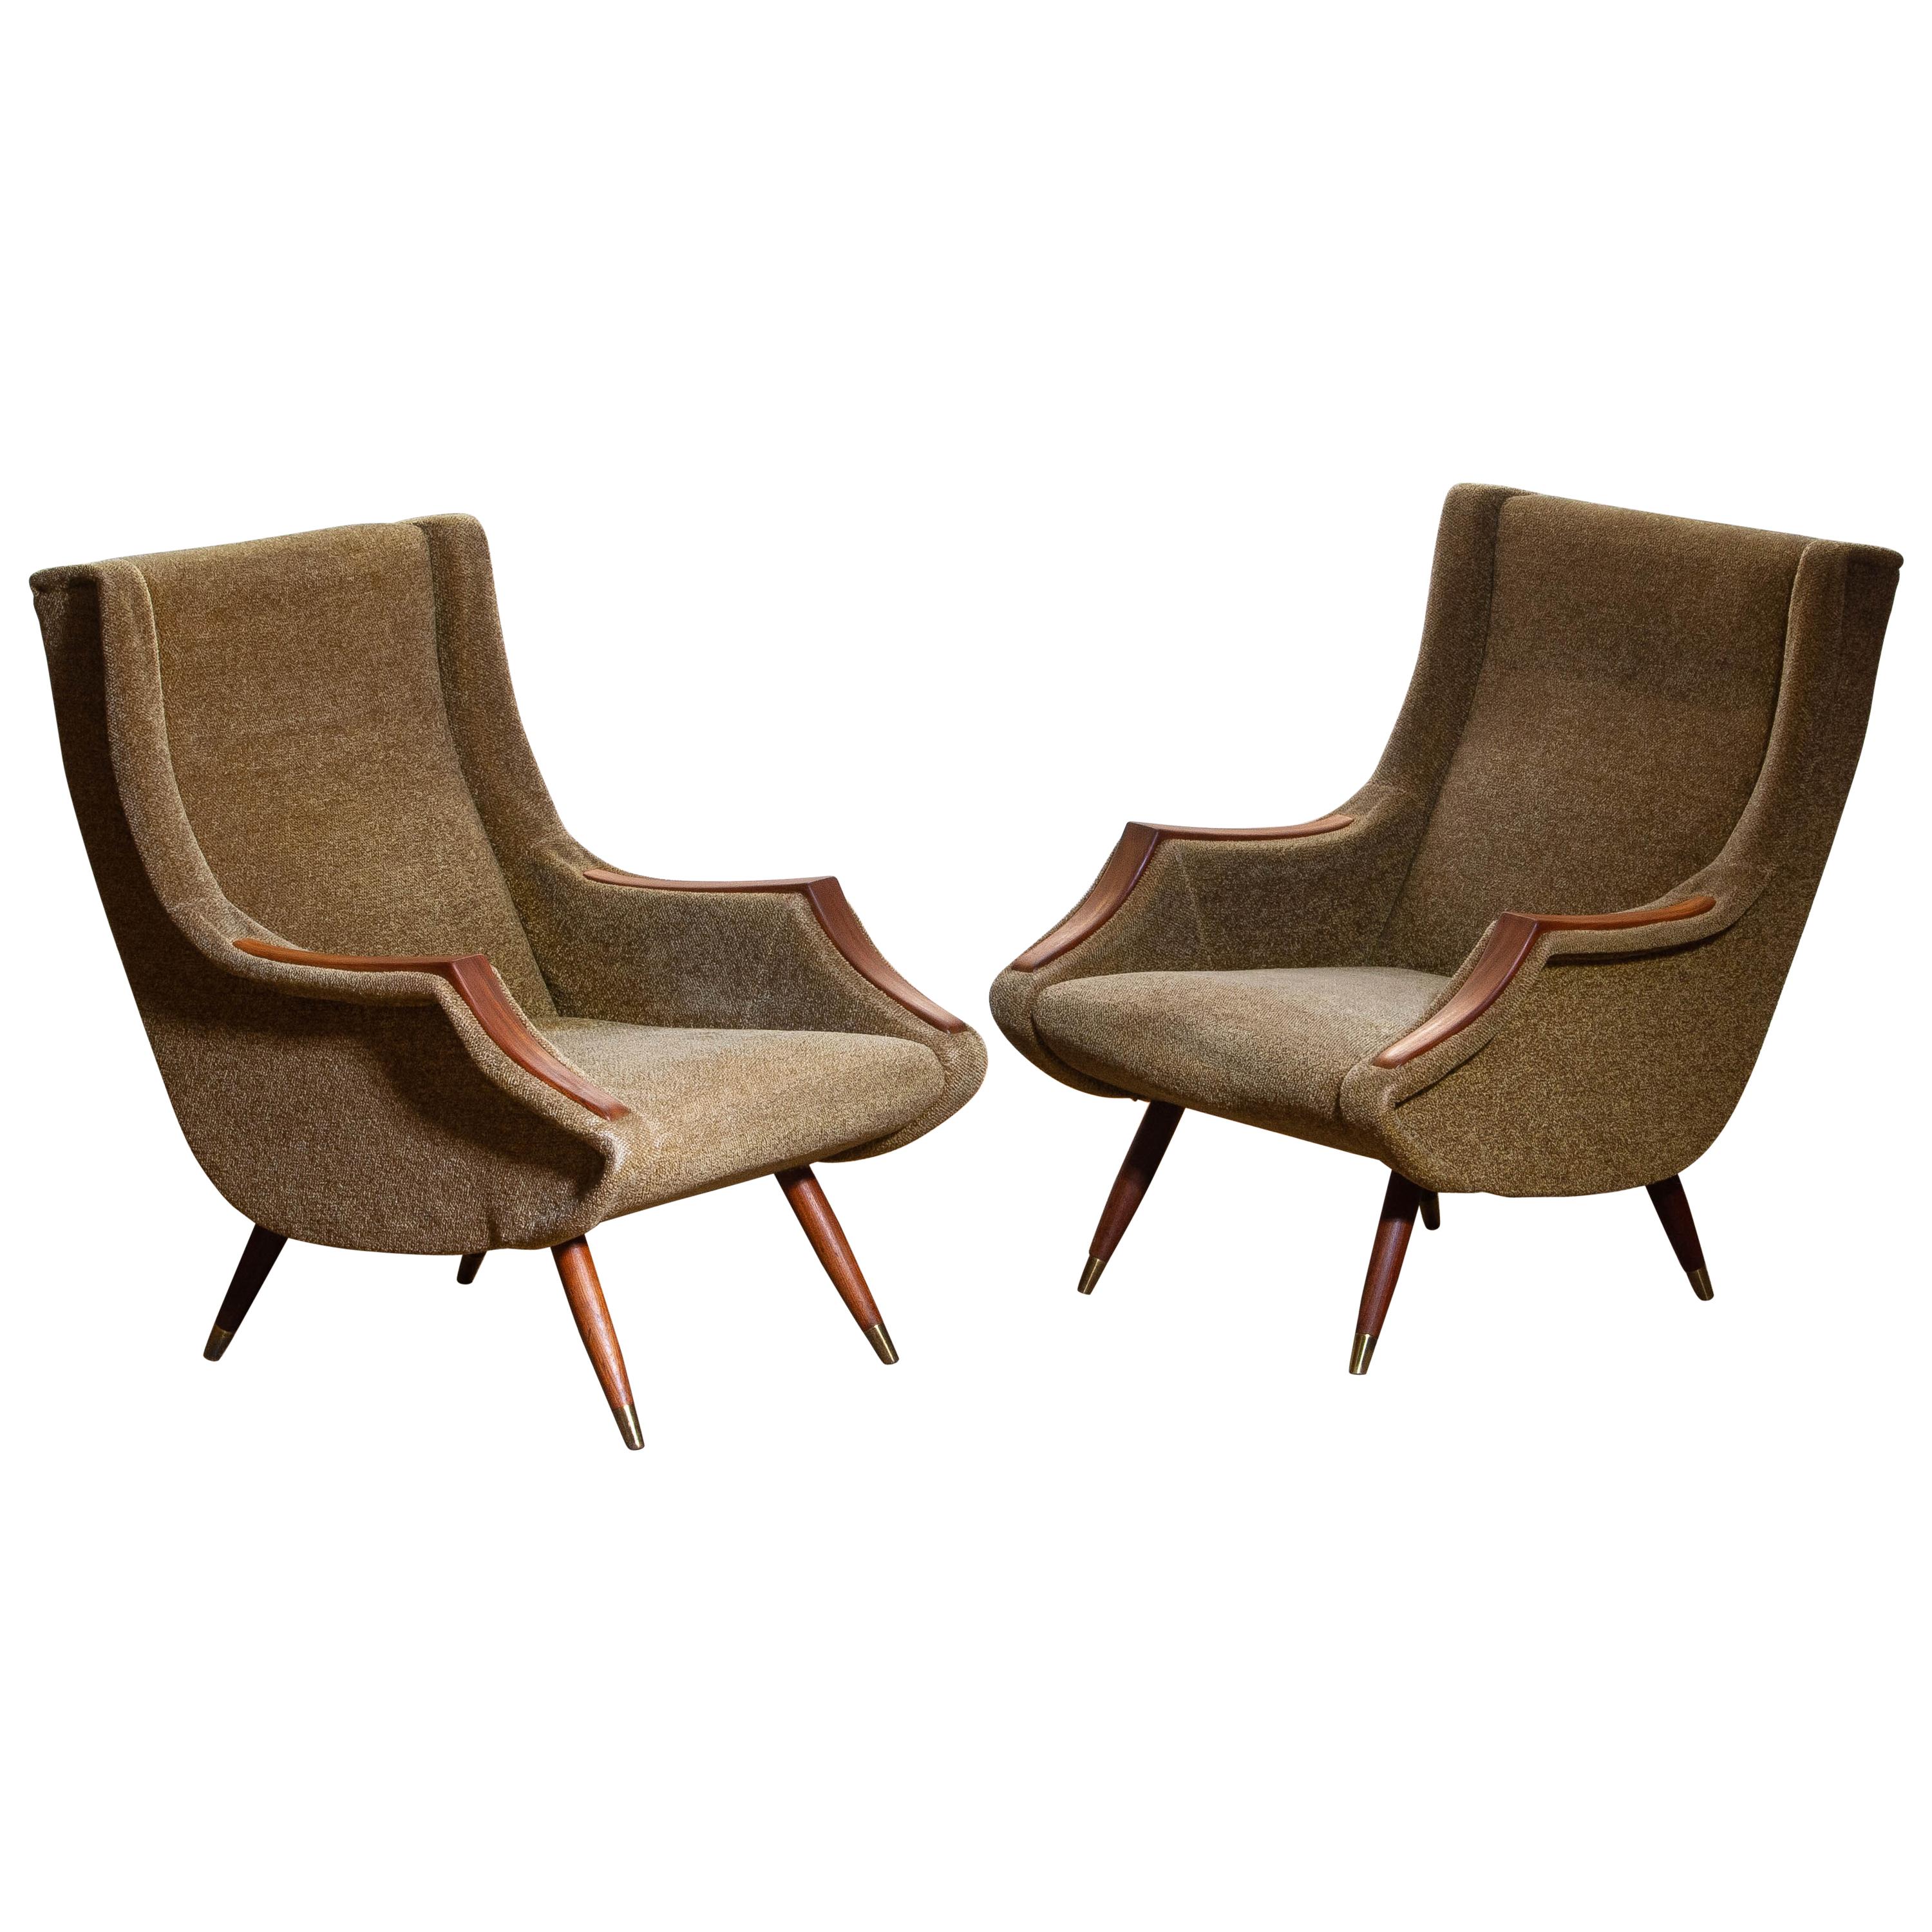 1950s extremely rare pair easy / lounge chairs designed by Aldo Morbelli for Isa Bergamo Italy, both still in original condition.
Armrests and legs in teak.
Overall impression for the age is good.
One chair shows slide discoloration to one side.